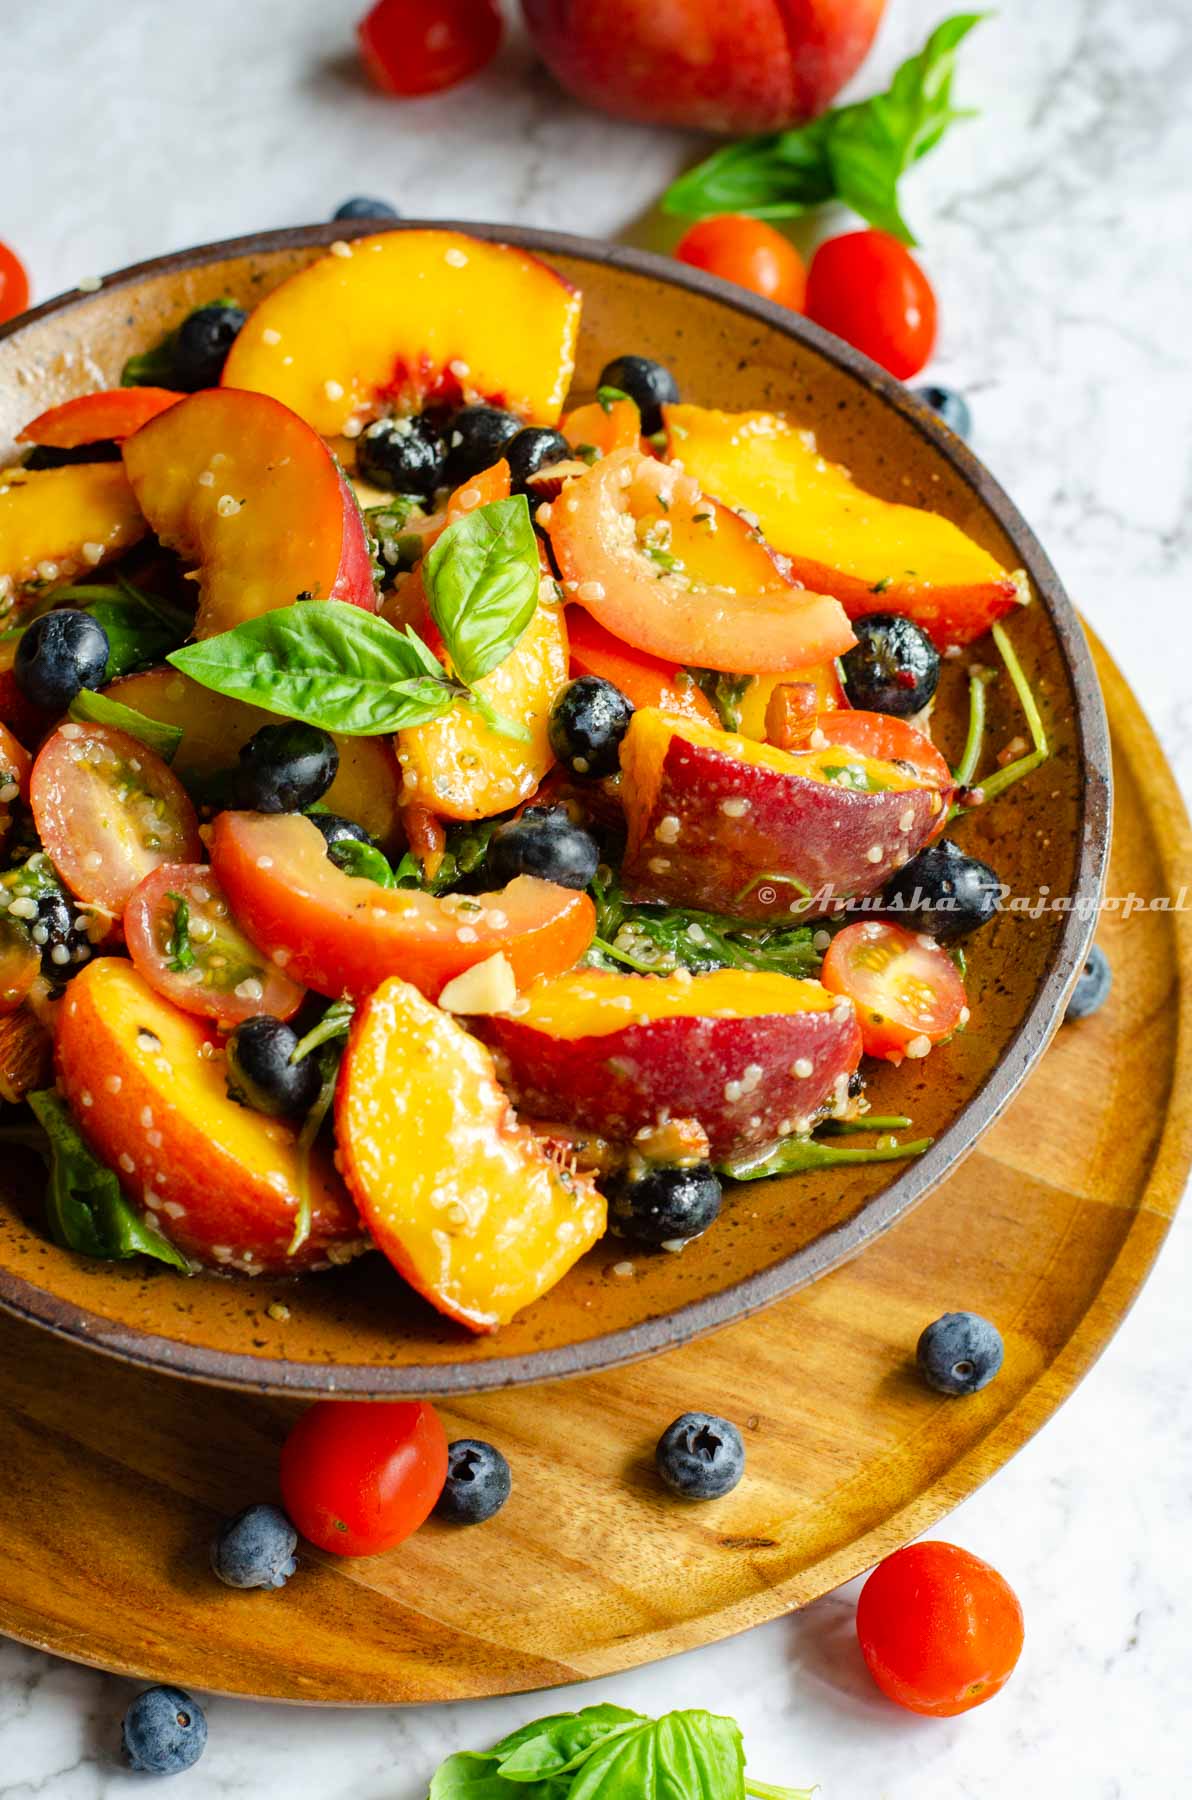 easy peach salad with summer fruits served in a brown shallow bowl